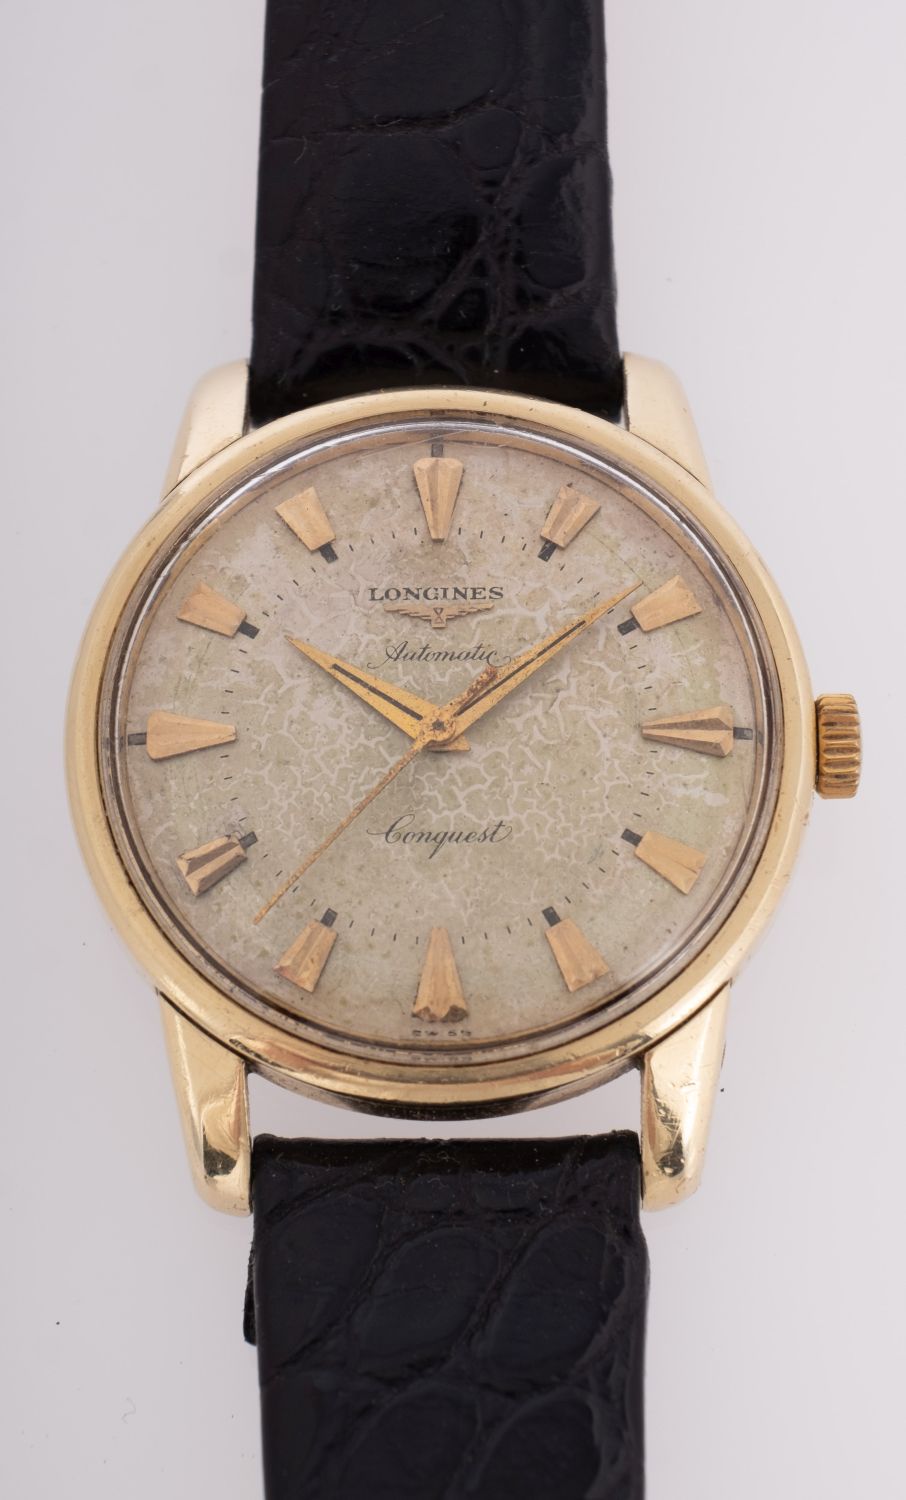 Longines Conquest Automatic a gold-plated gentleman's wristwatch the dial signed Longines, Conquest, - Image 2 of 2